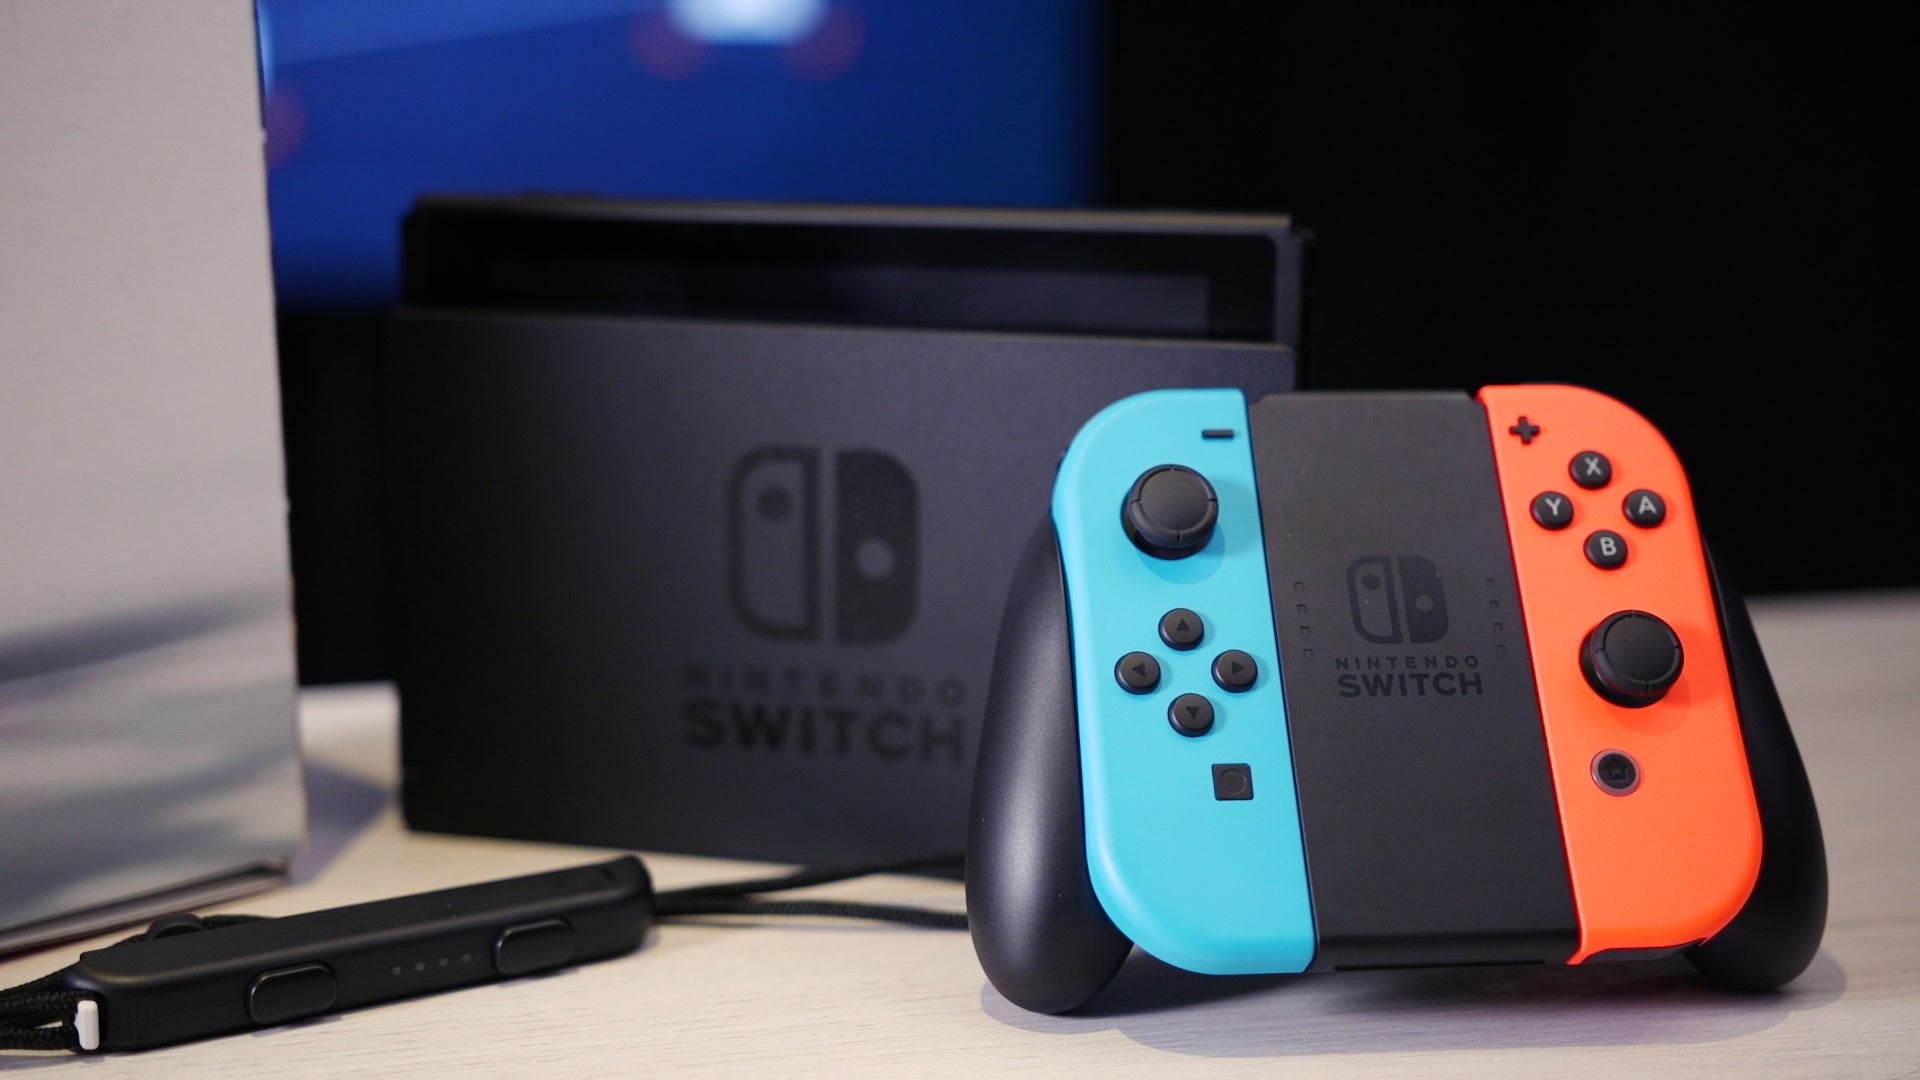 Nintendo Switch review, Trusted opinions, Console analysis, Gaming experience, 1920x1080 Full HD Desktop